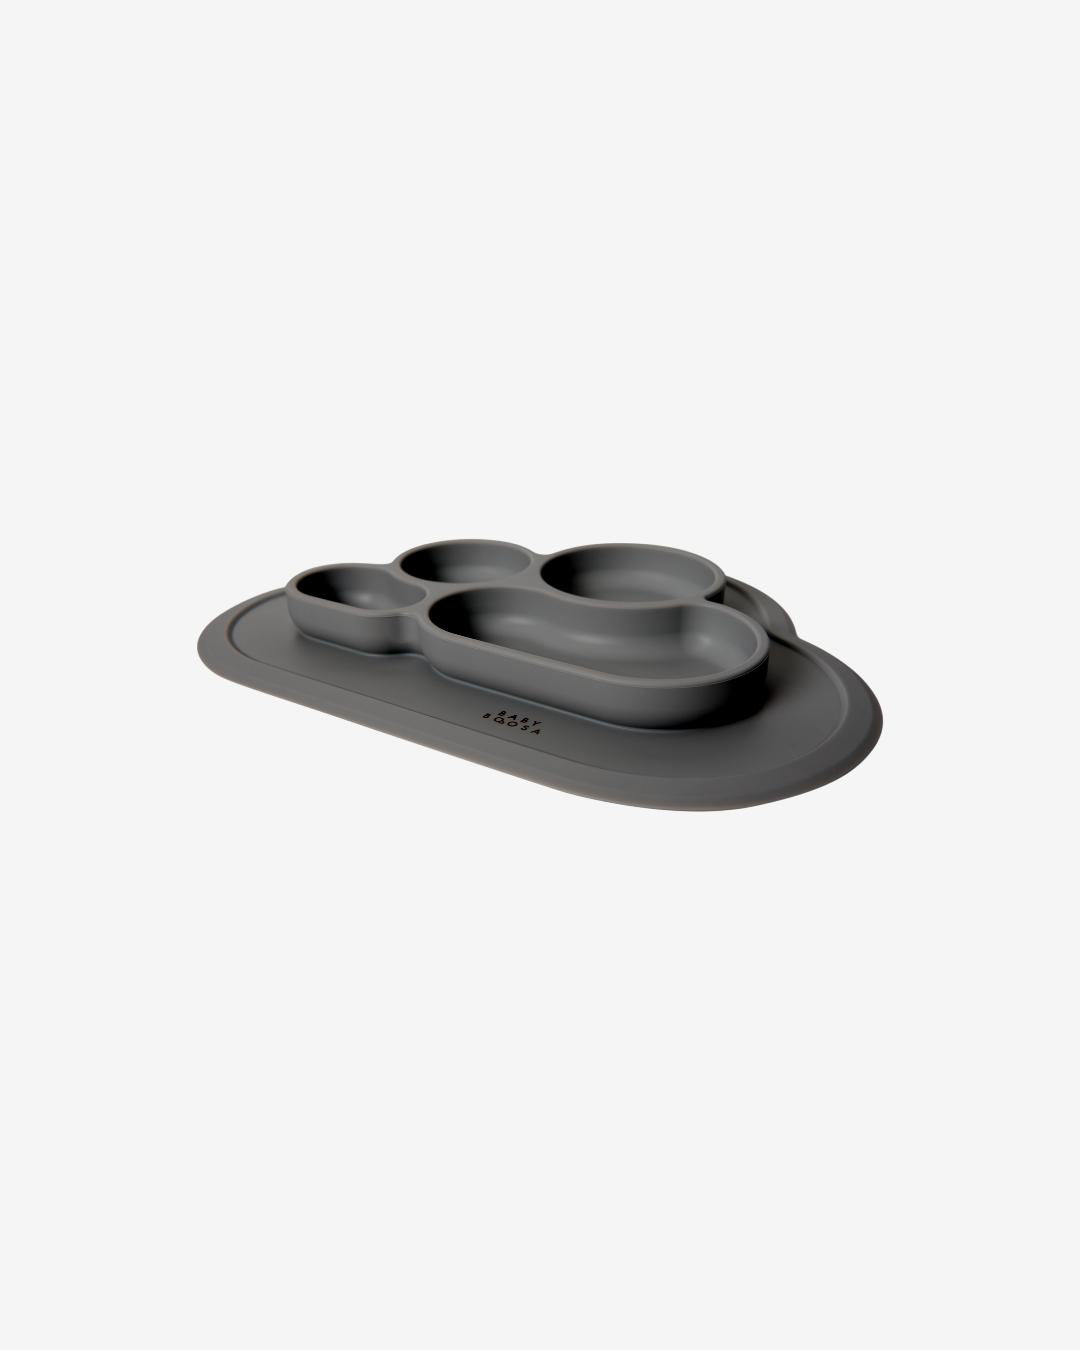 Weaning Cloud Plate Mat | Grippy Suction | Non-slip | Catch-food | Side scoops | Easy clean (Charcoal Grey)